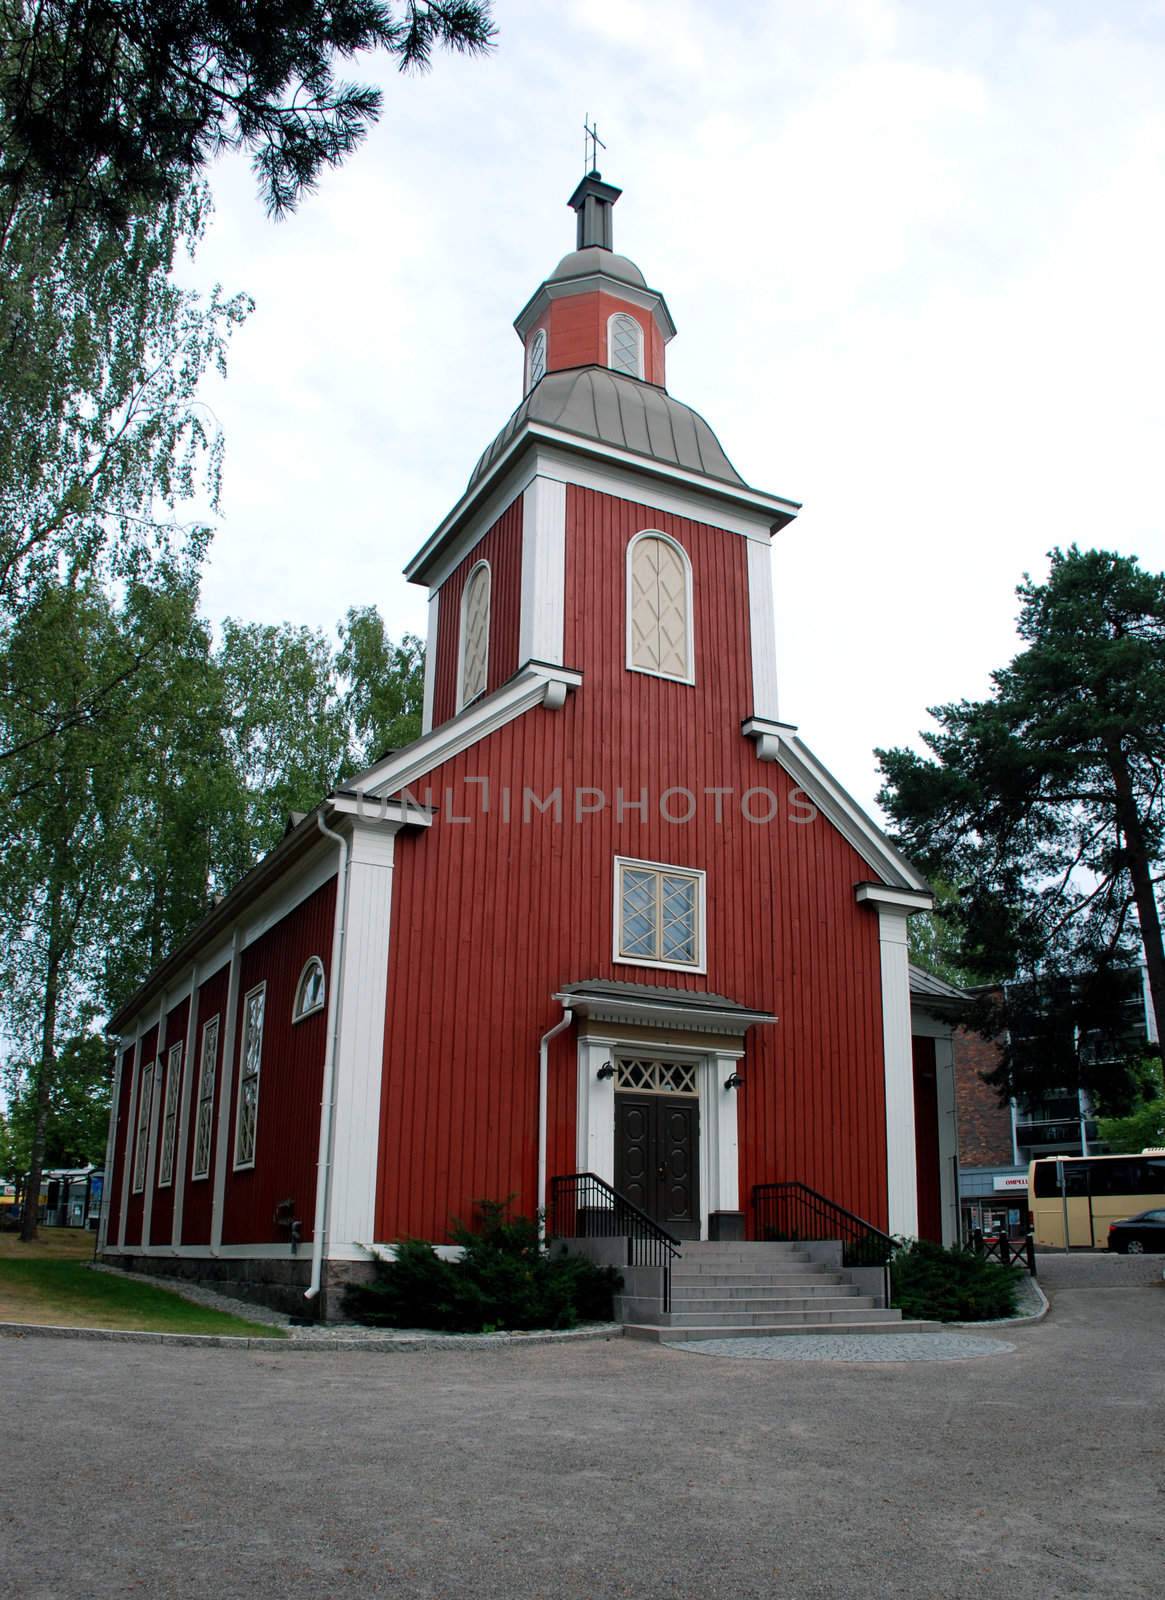 A sort of church in Hyvinkaa, A town not far from Helsinki.
The church is red and rounded by trees, by nature.